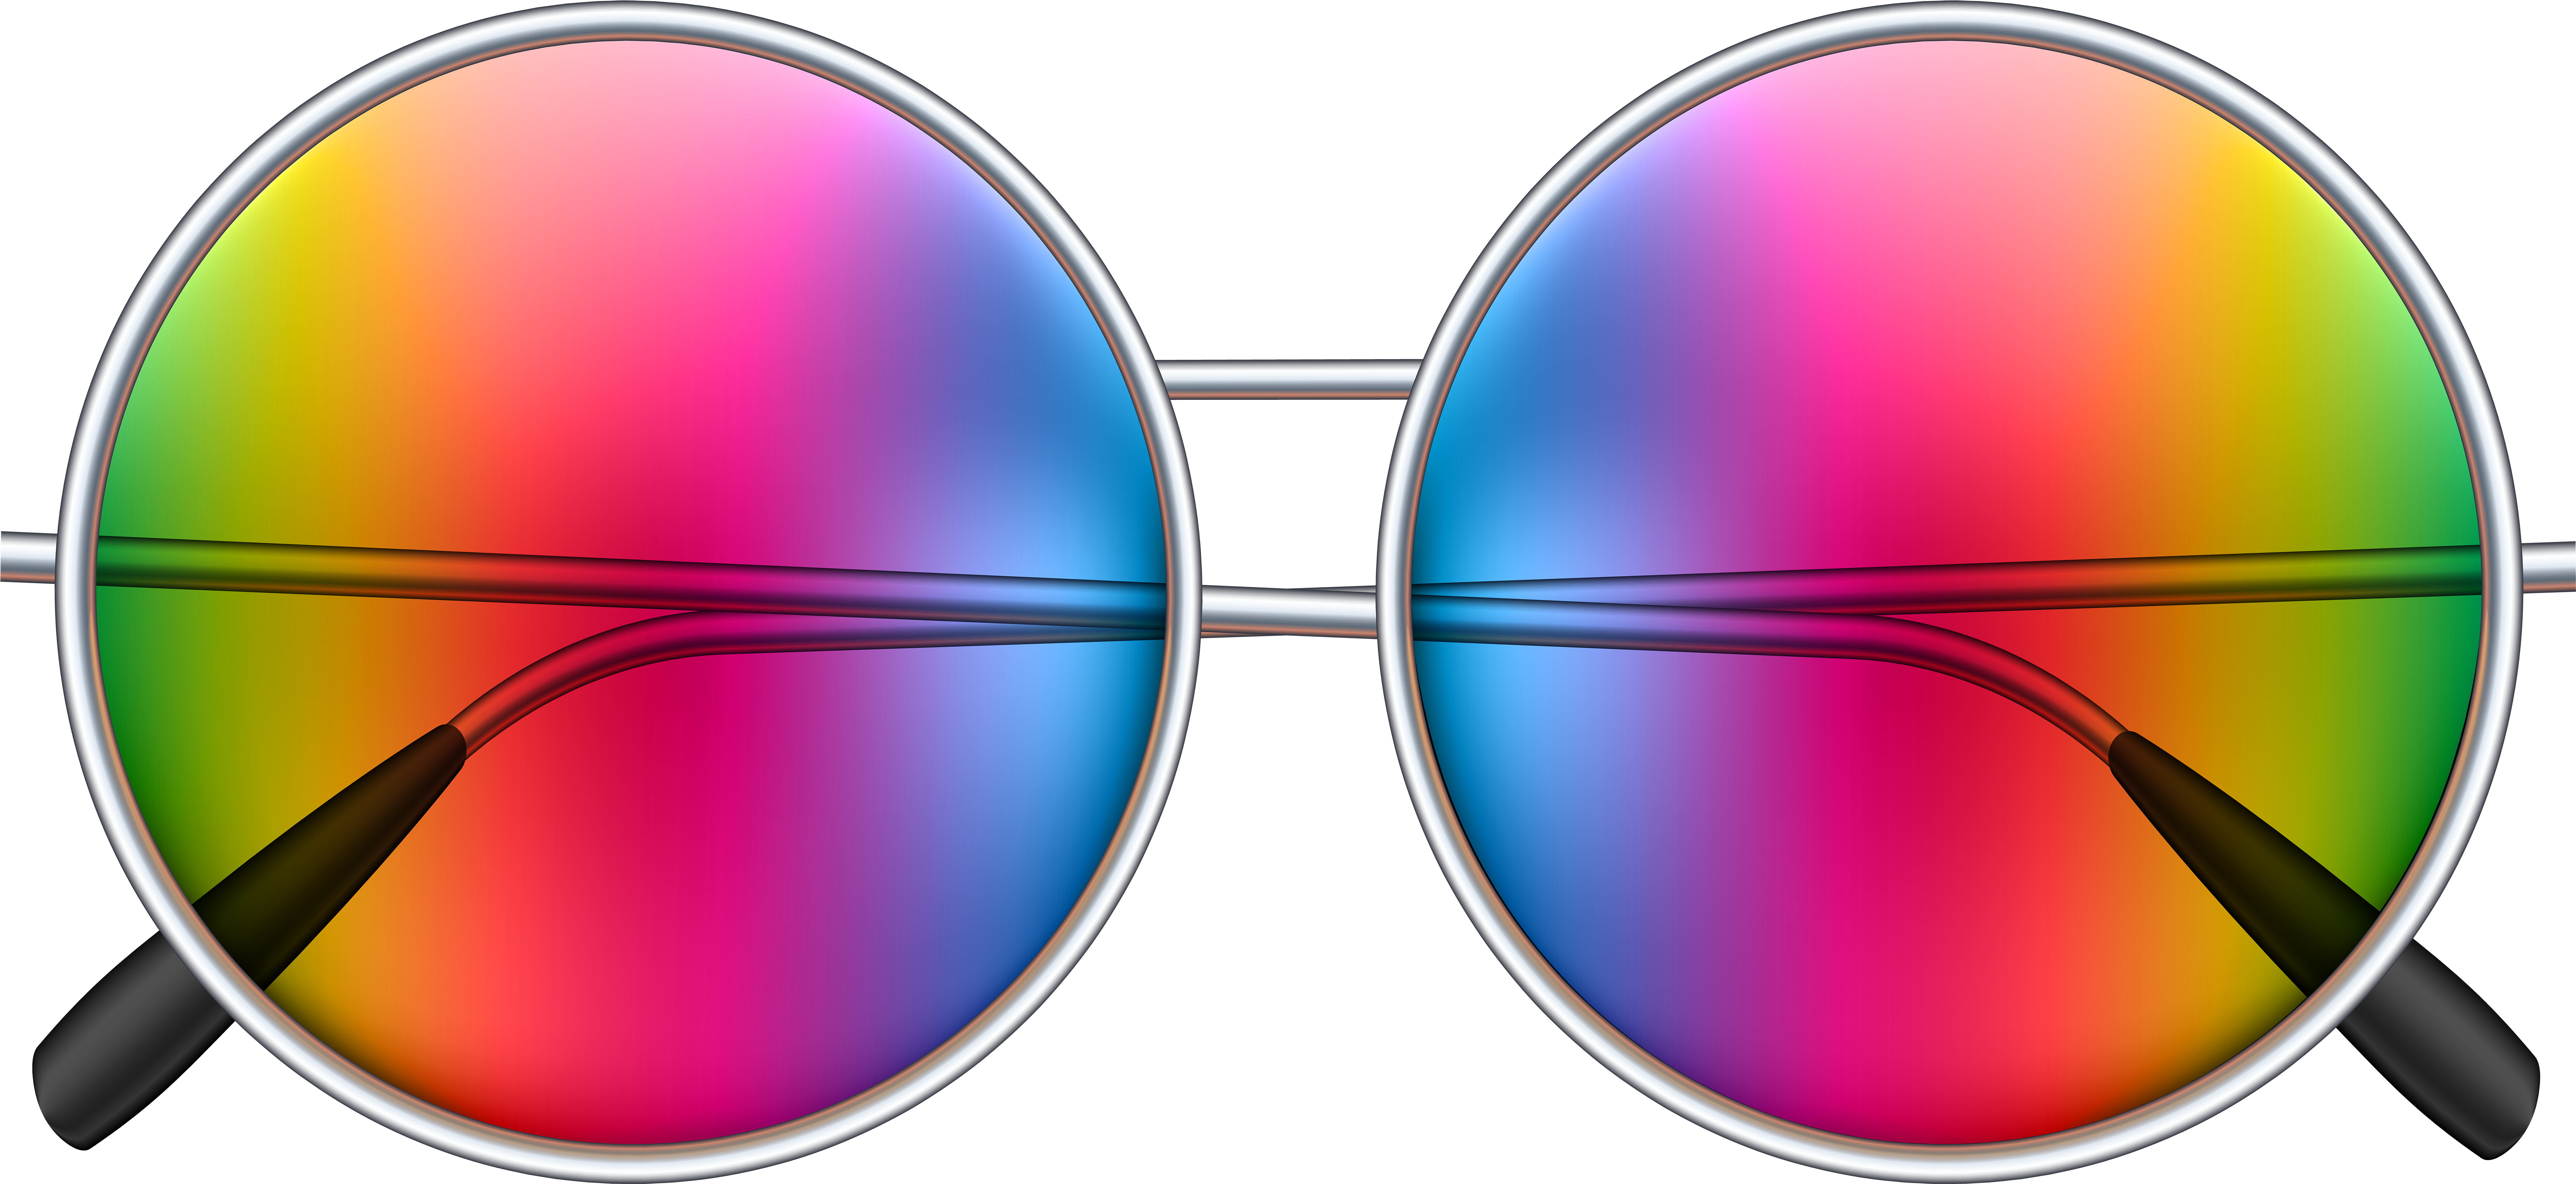 A Pair Of Sunglasses With A Rainbow Colored Lens